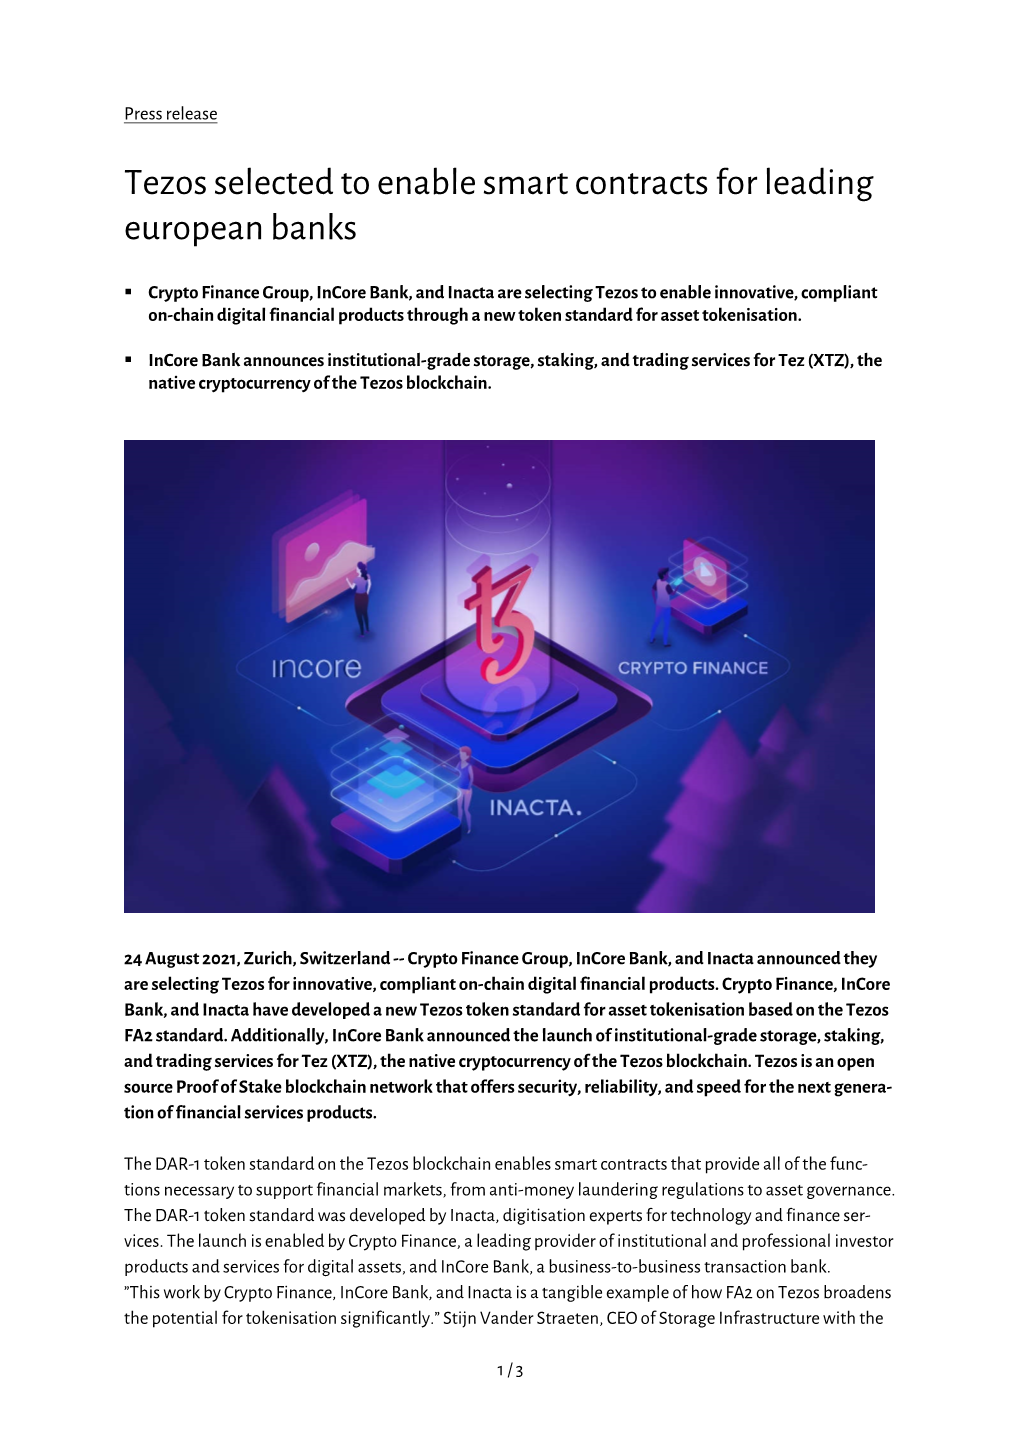 Tezos Selected to Enable Smart Contracts for Leading European Banks